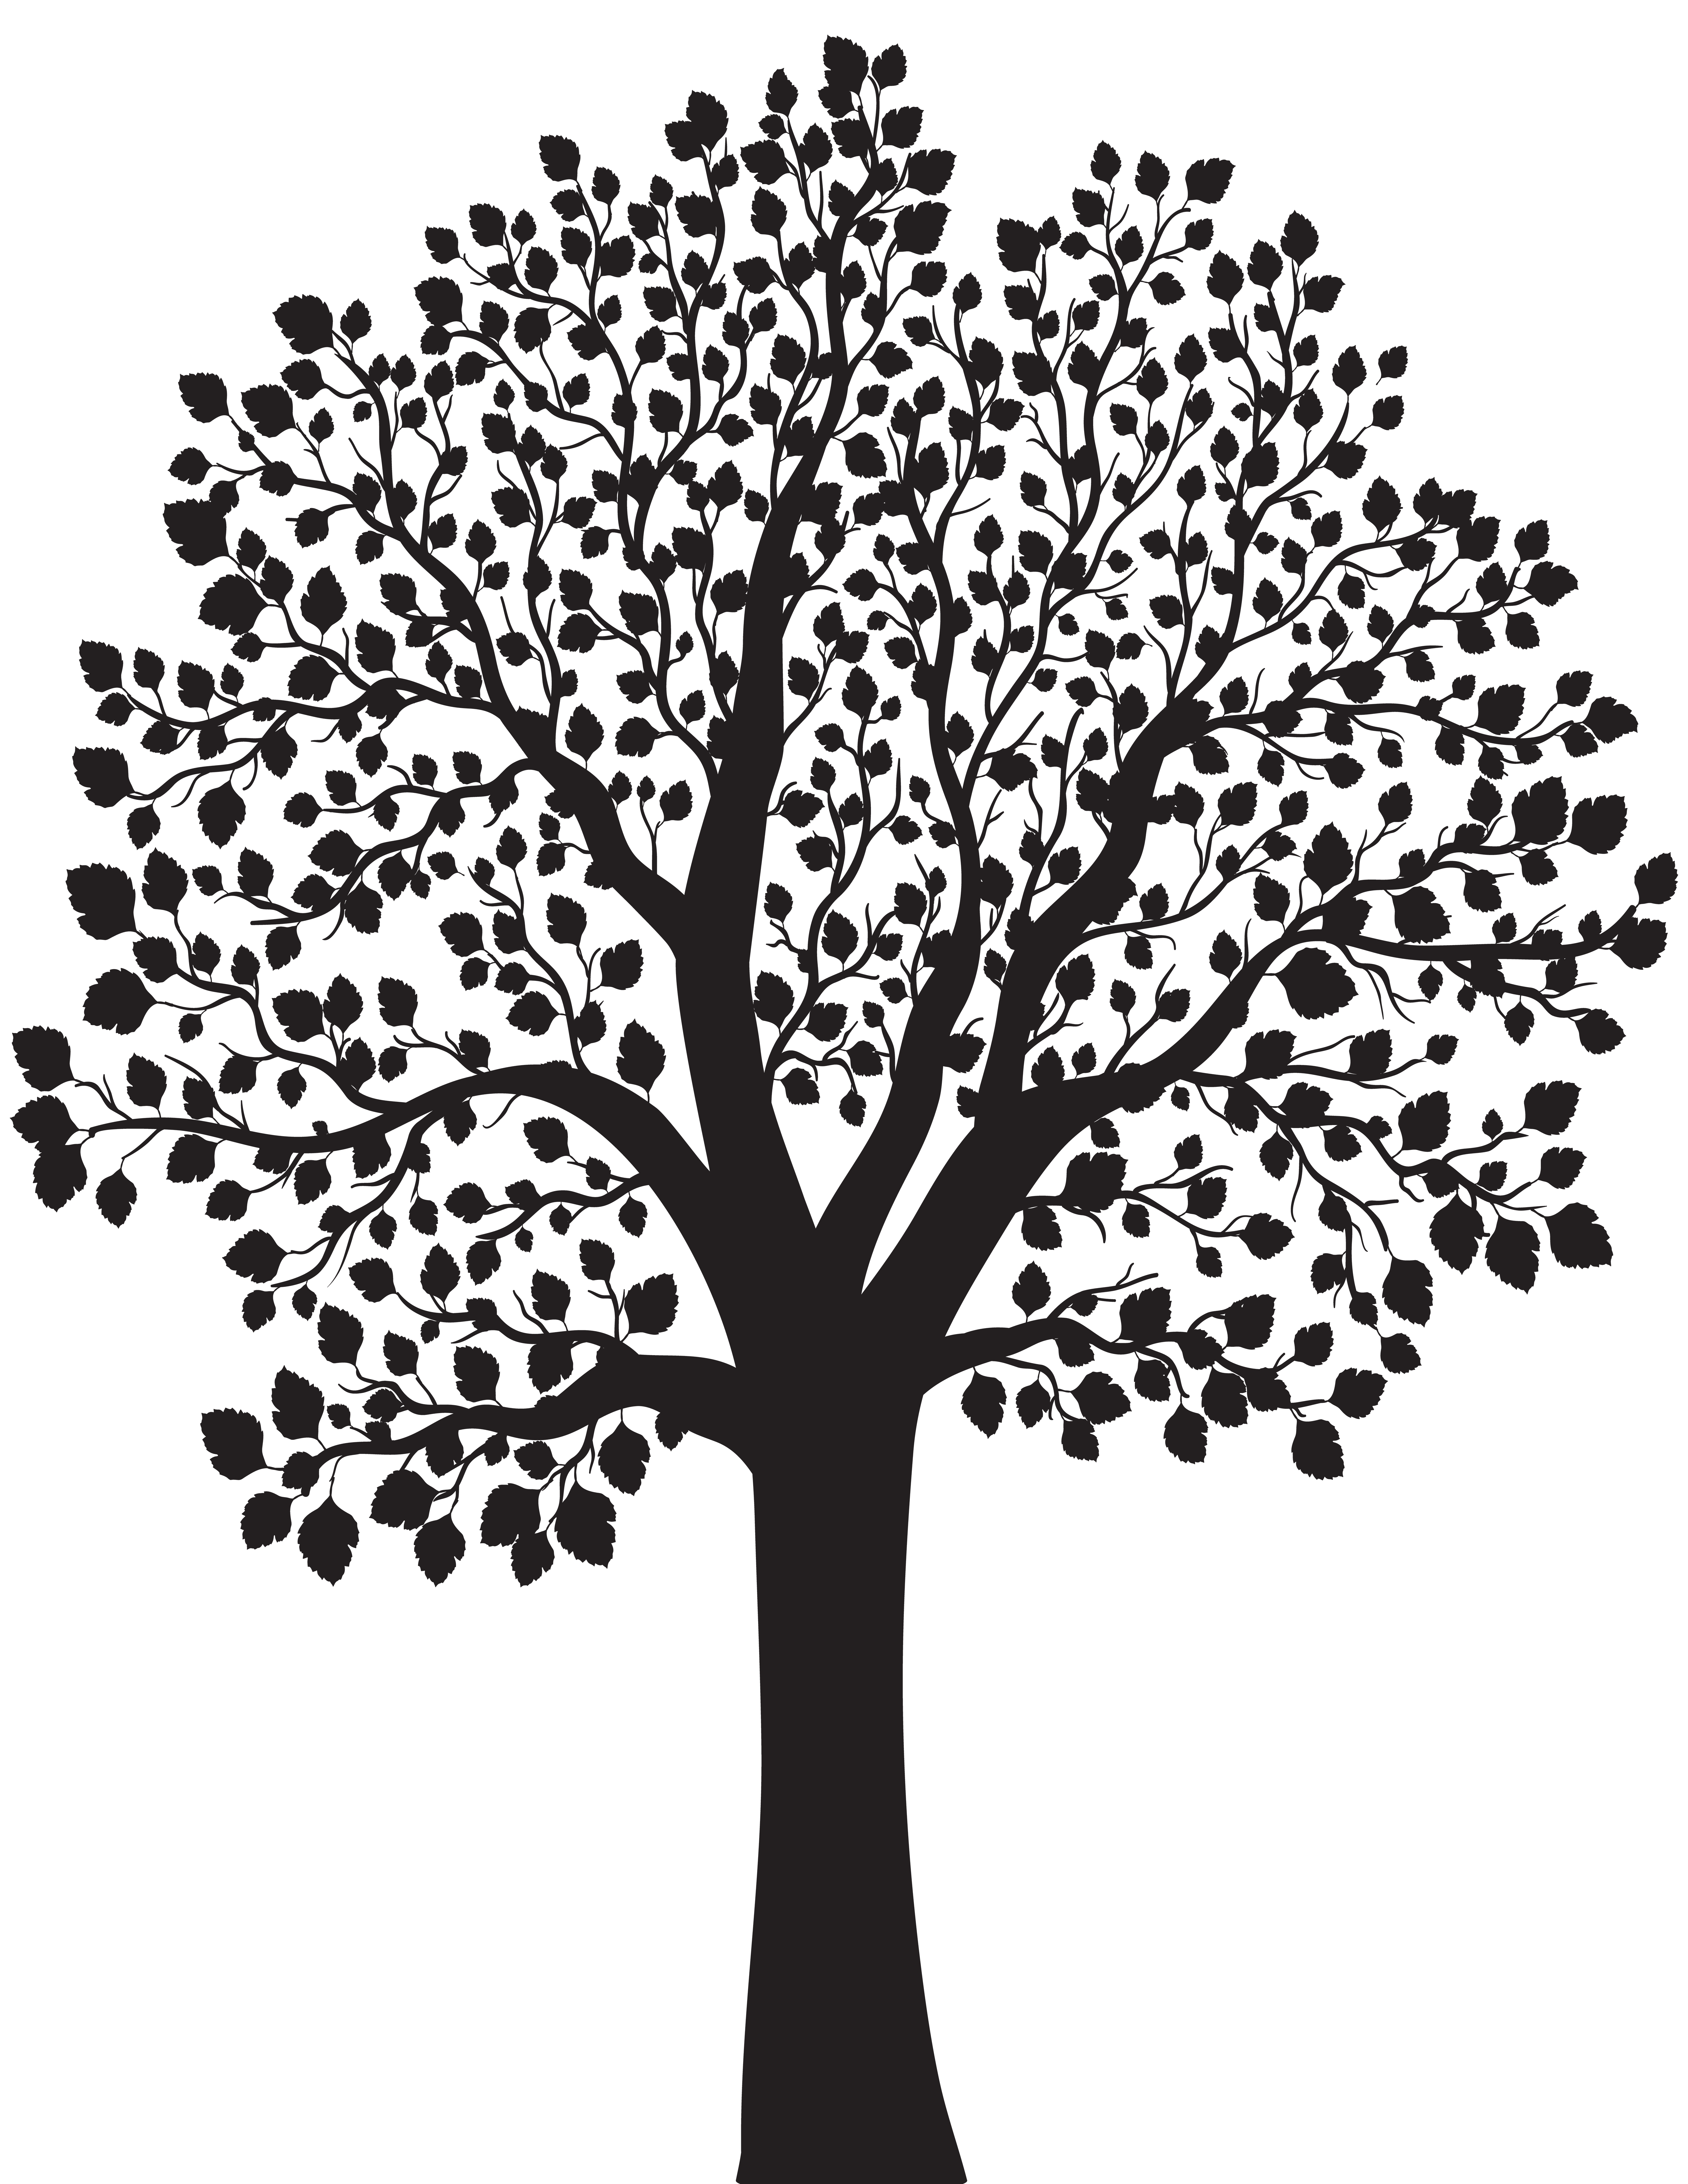 Tree Silhouette Png Clip Art Image Gallery Yopriceville High Quality Images And Transparent Png Free Clipart